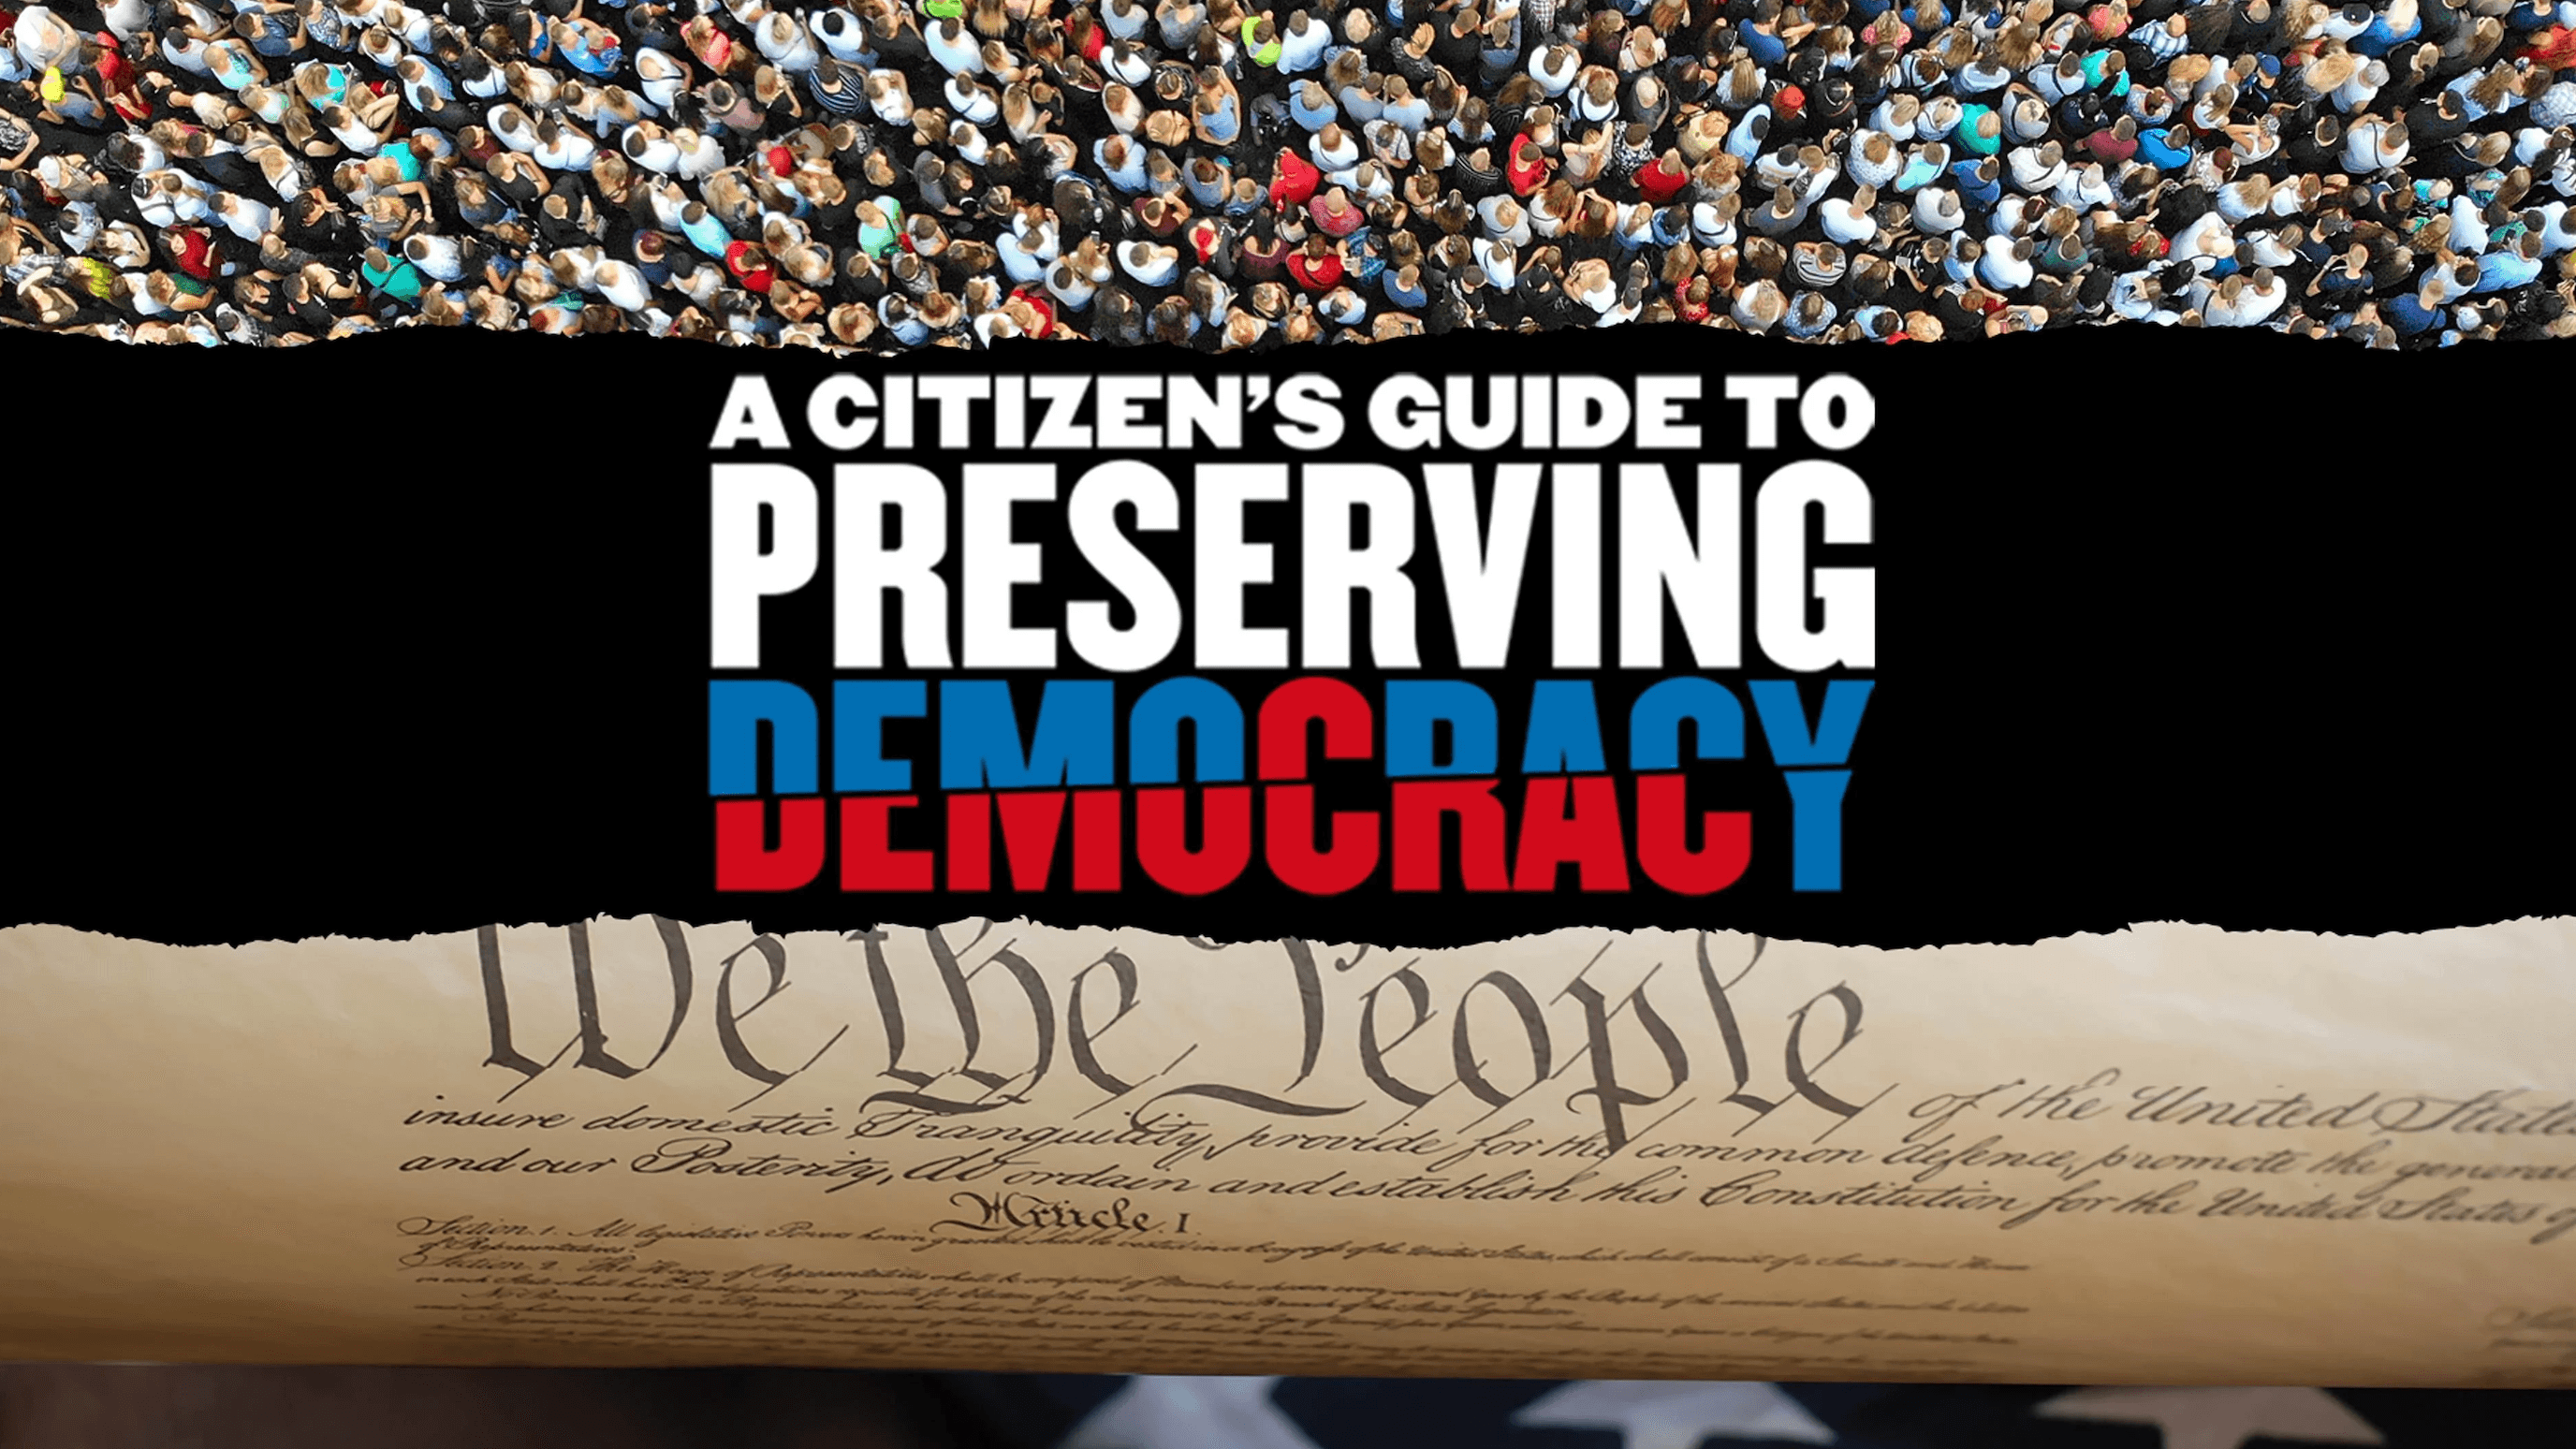 A Citizens Guide to Preserving Democracy - a PBS broadcast series